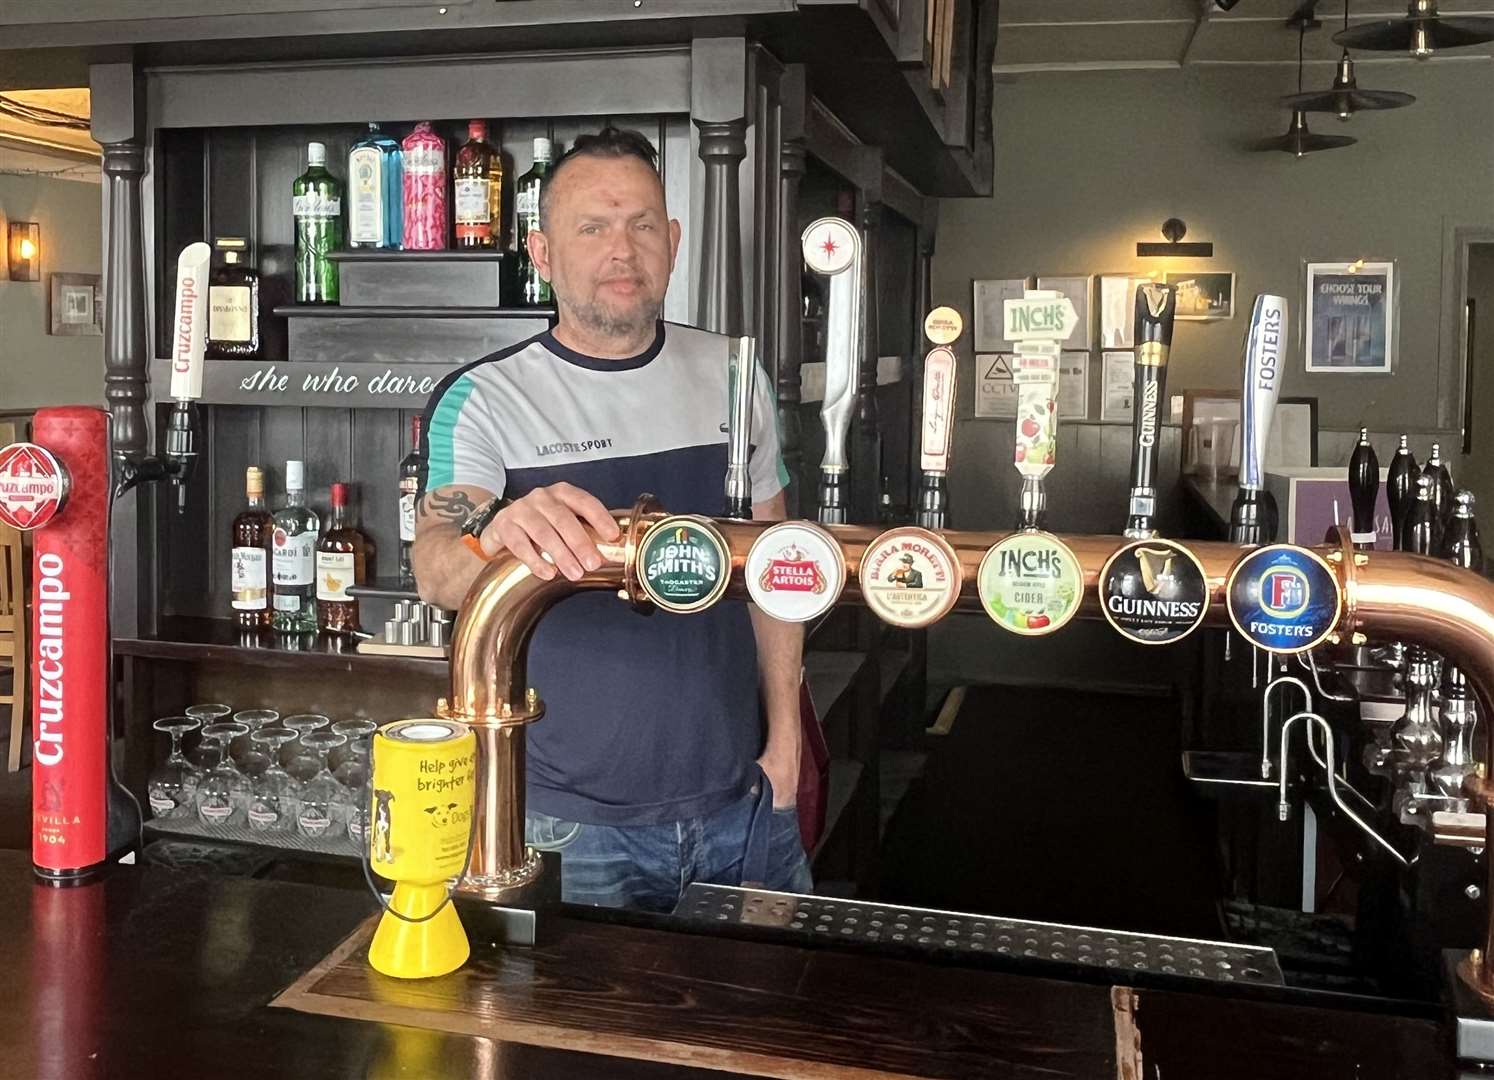 Matthew Brett has taken over the The Alma in Deal - and says he wants the pub to reach its full potential